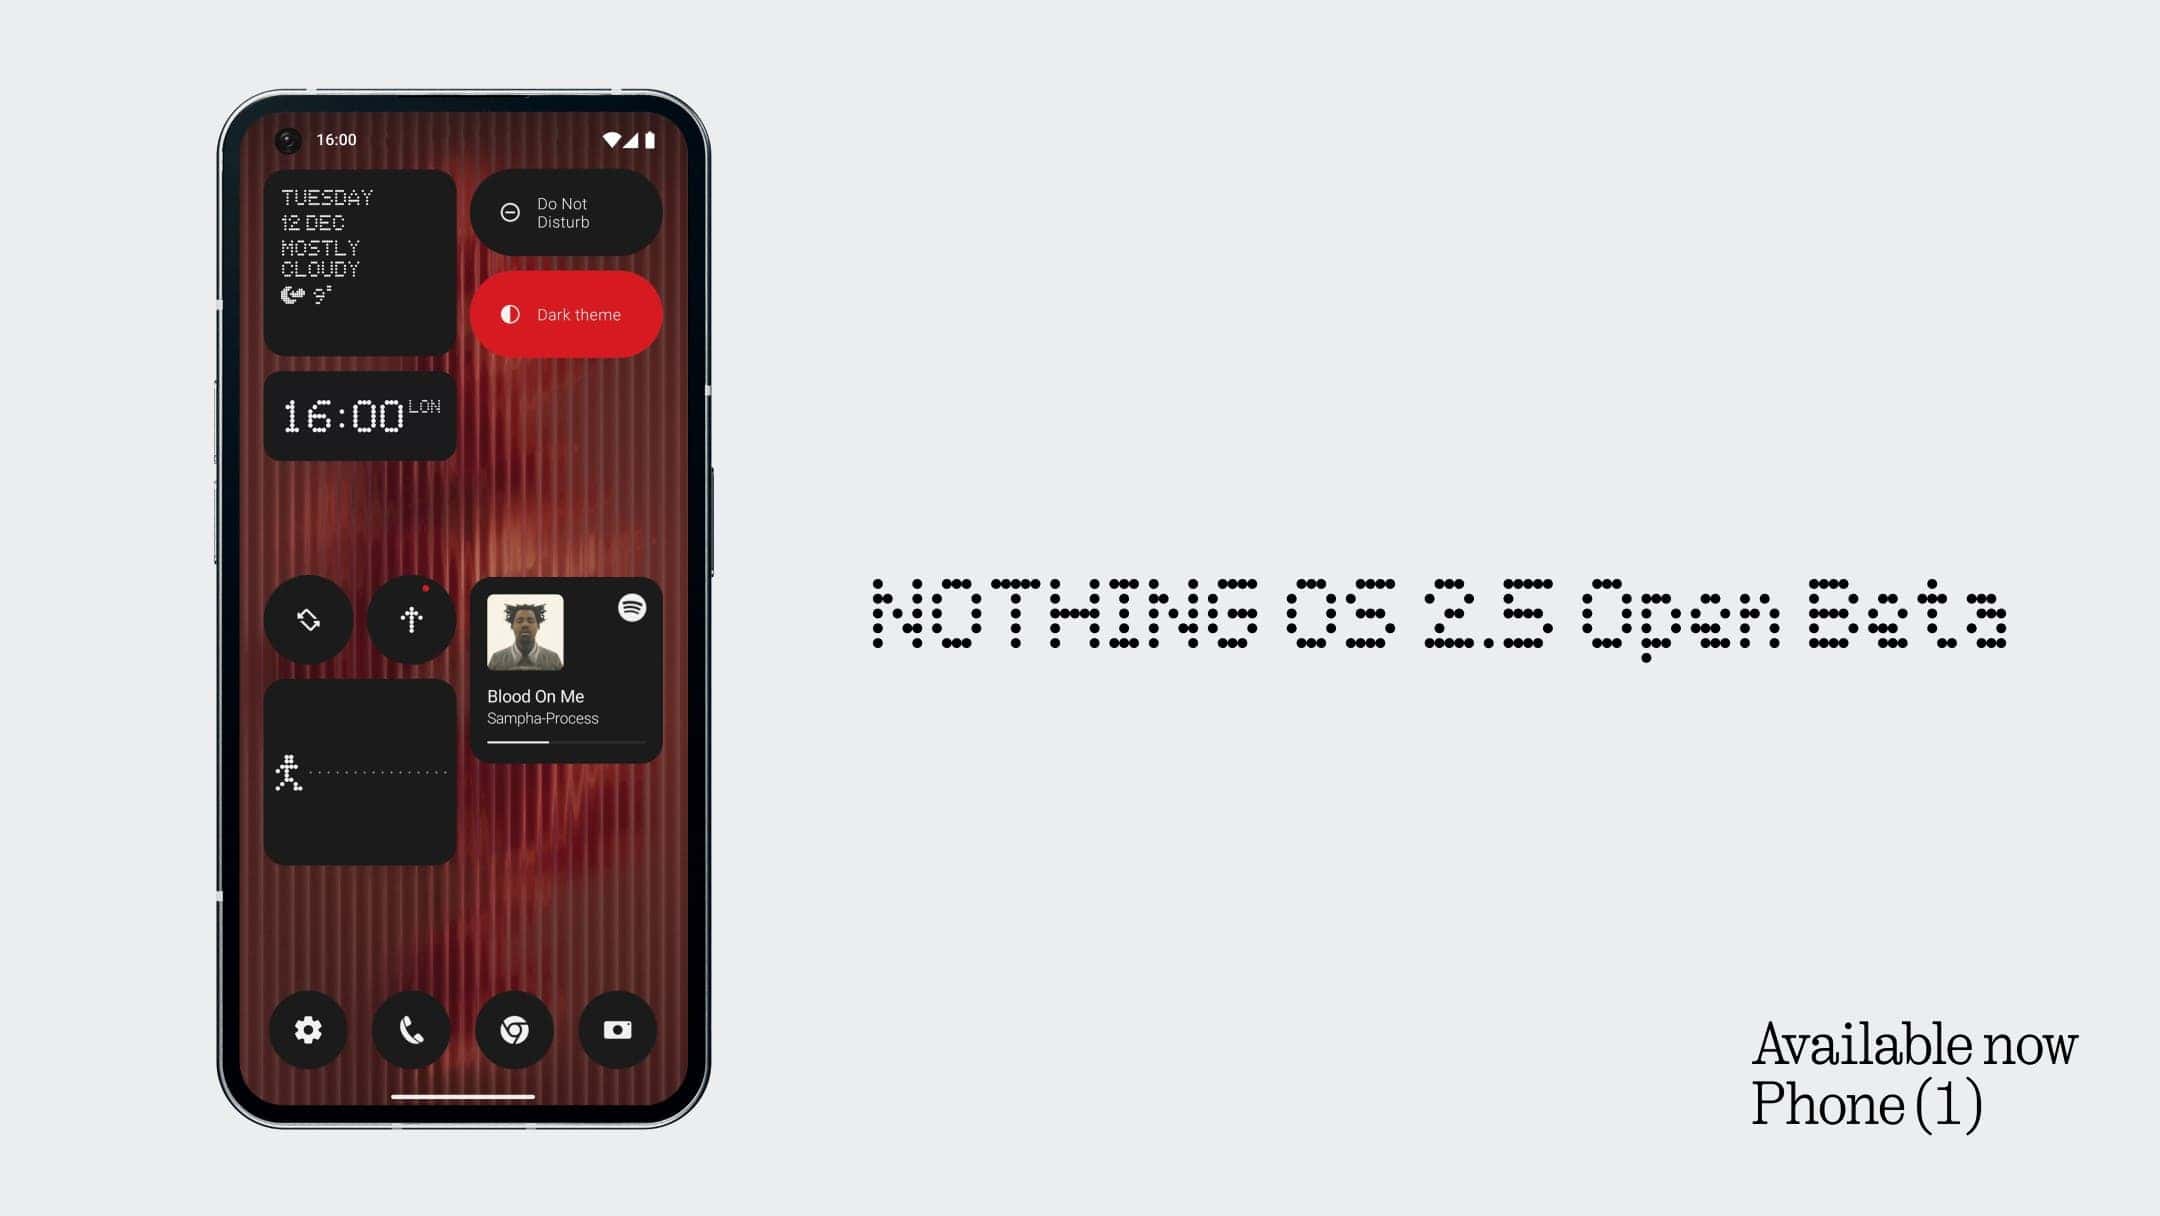 Nothing OS 2.5 Open Beta 2 Update for Phone (1)